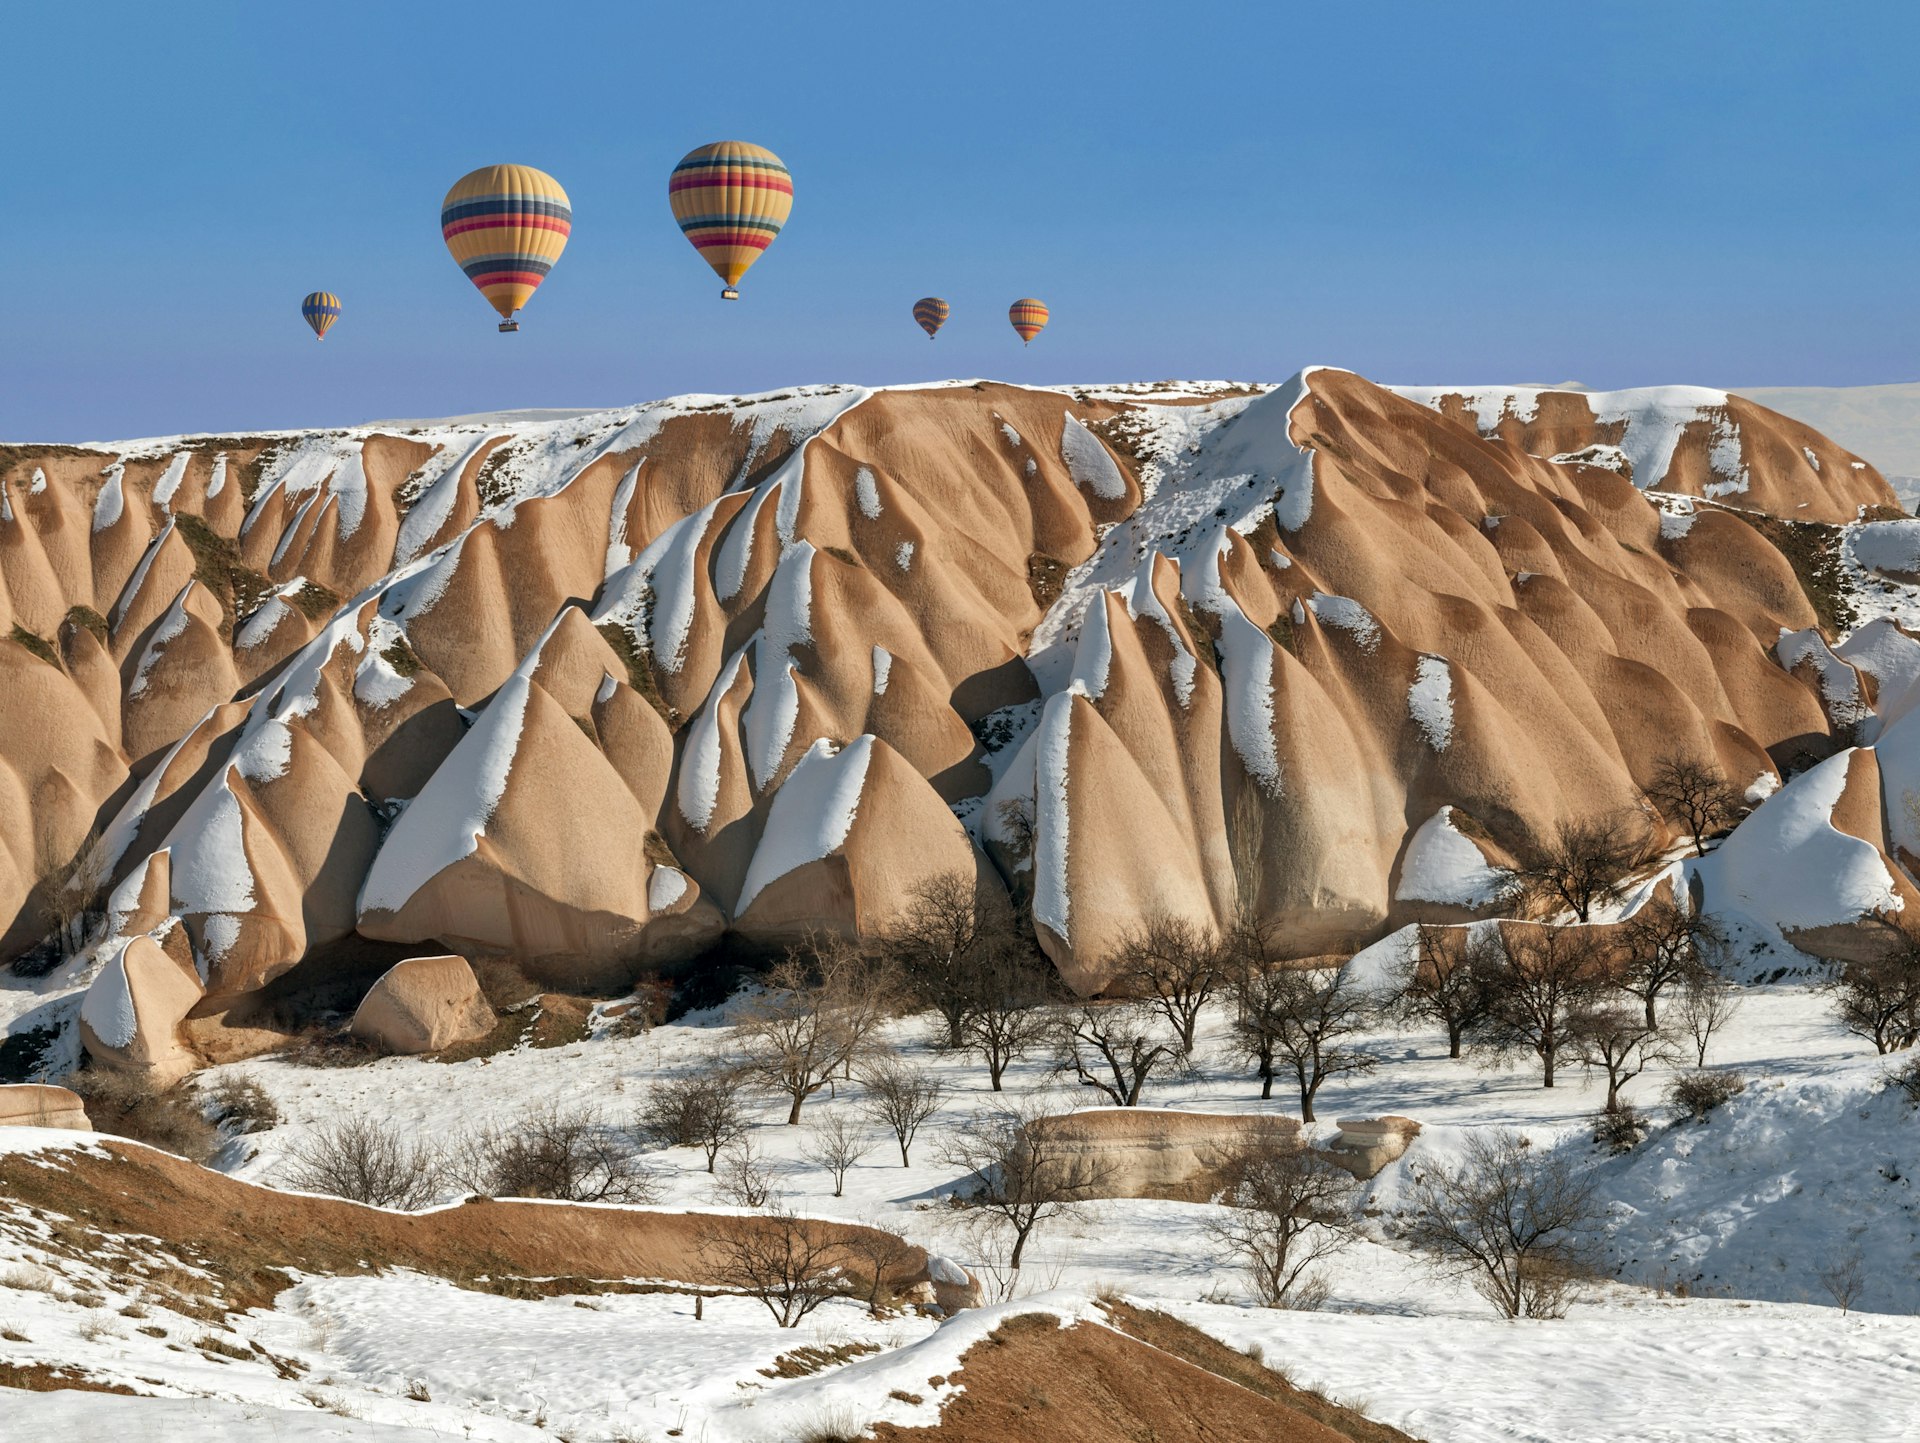 Hot air balloons rising above snow-covered rock formations in Nevsehir.